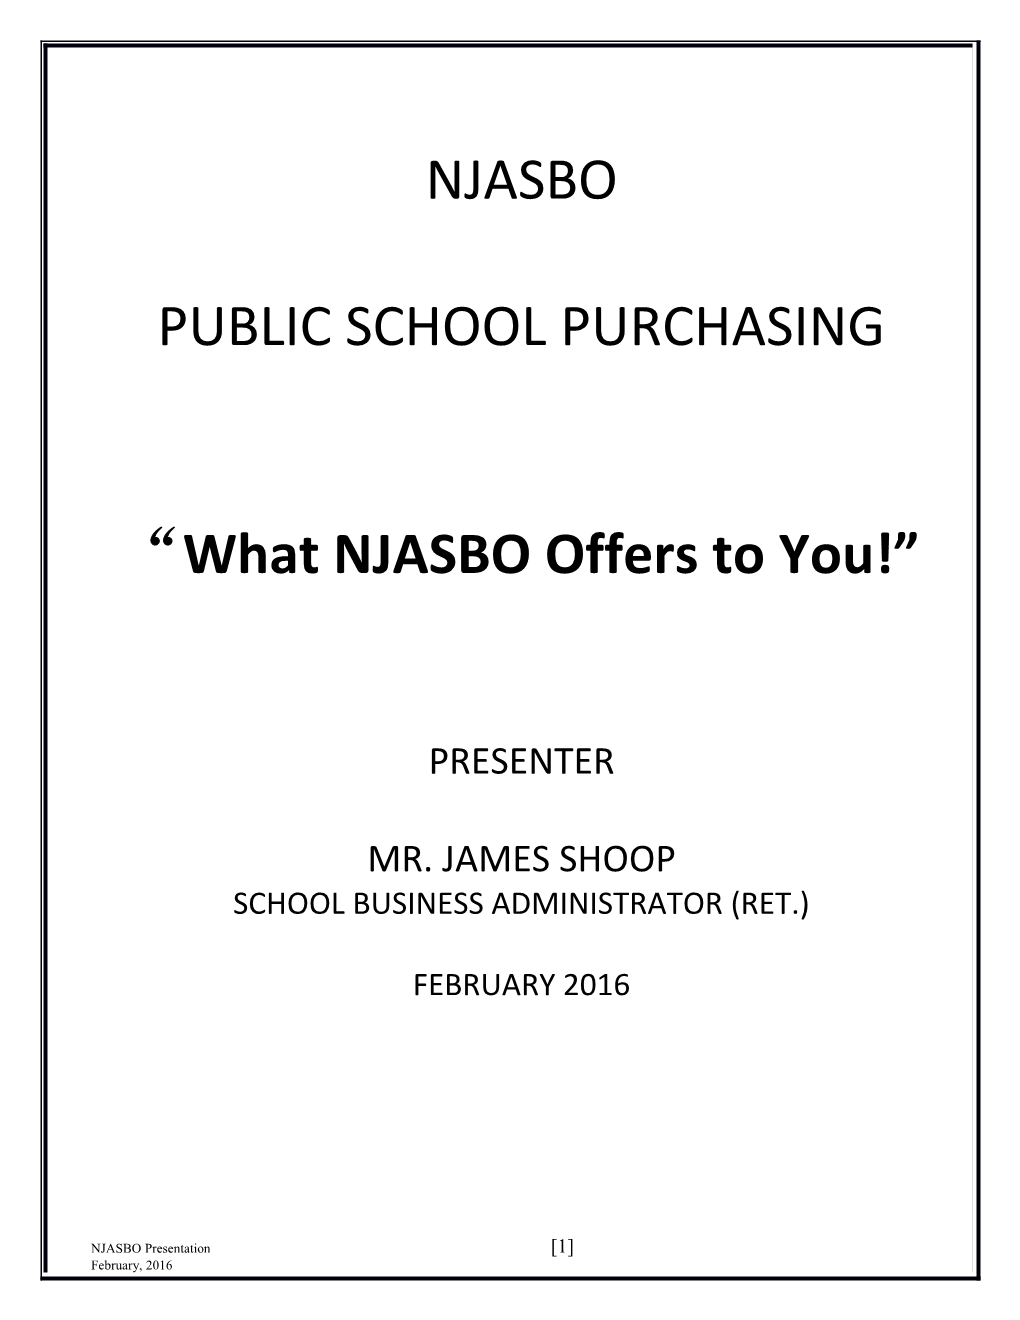 What NJASBO Offers to You!